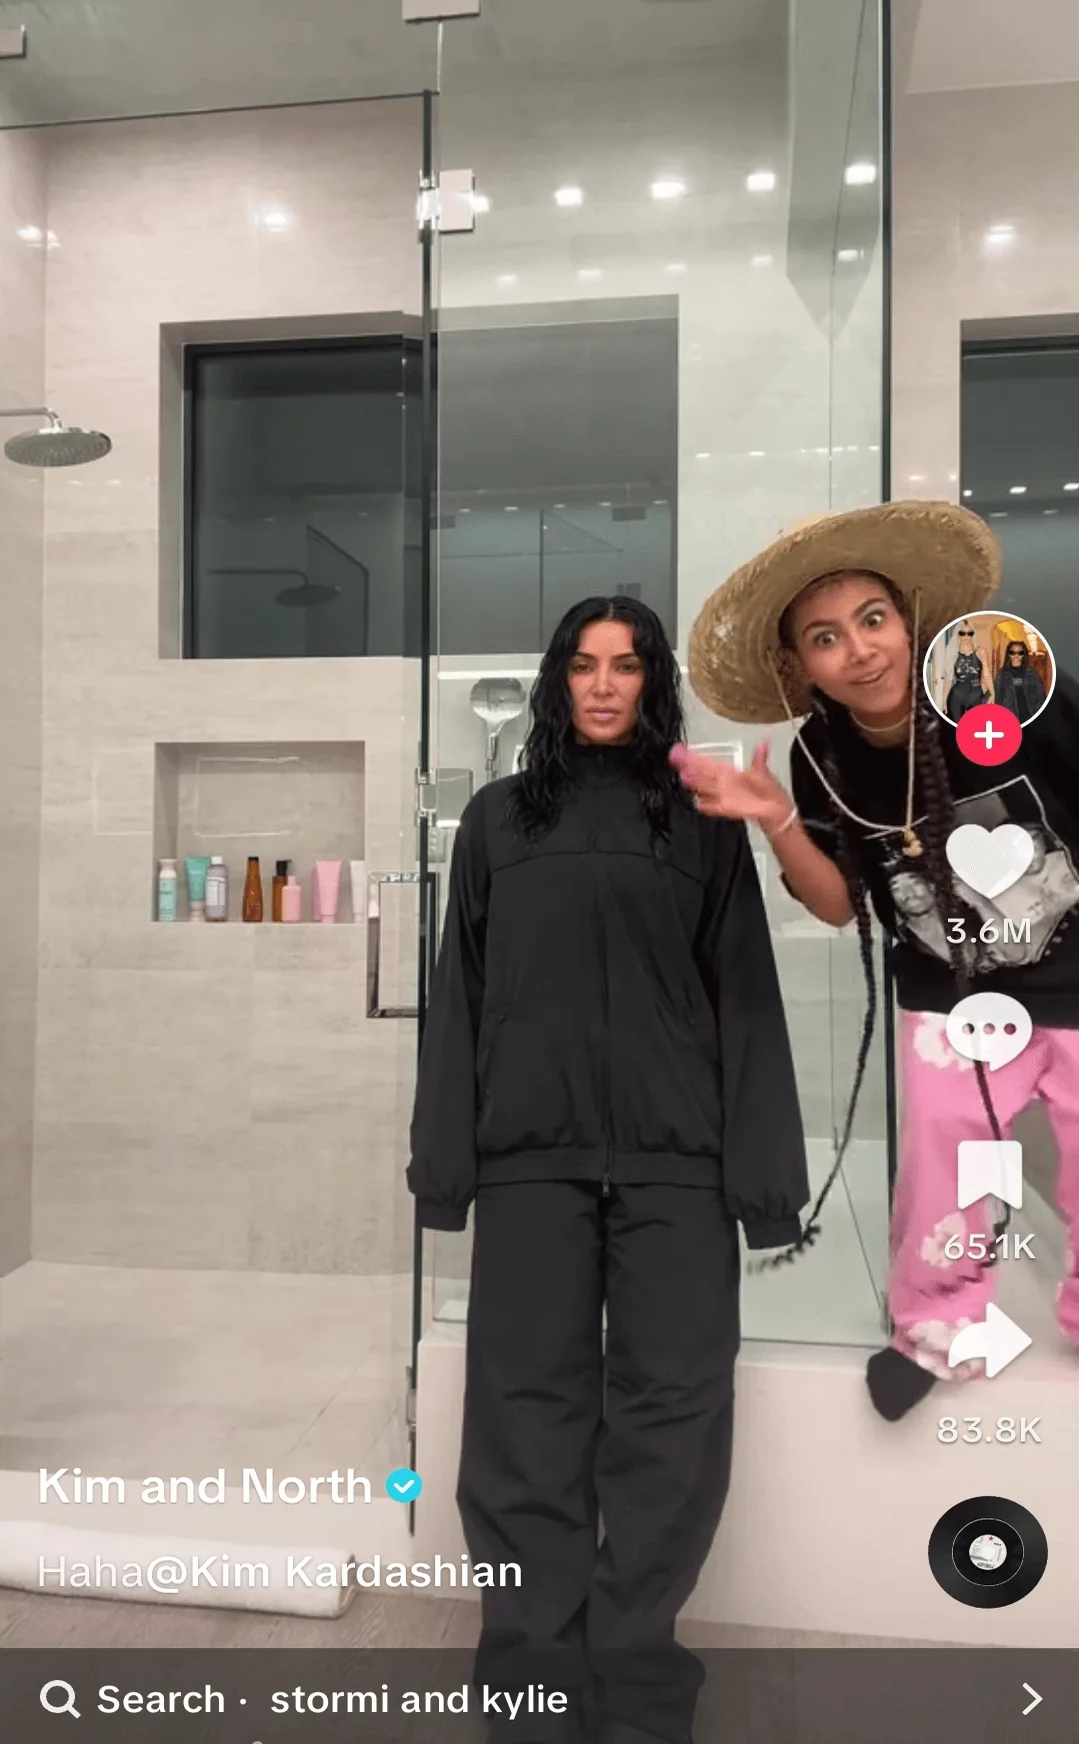 Two women in a modern bathroom, one in casual black attire and the other in a playful outfit with a sombrero, featured in a social media video.